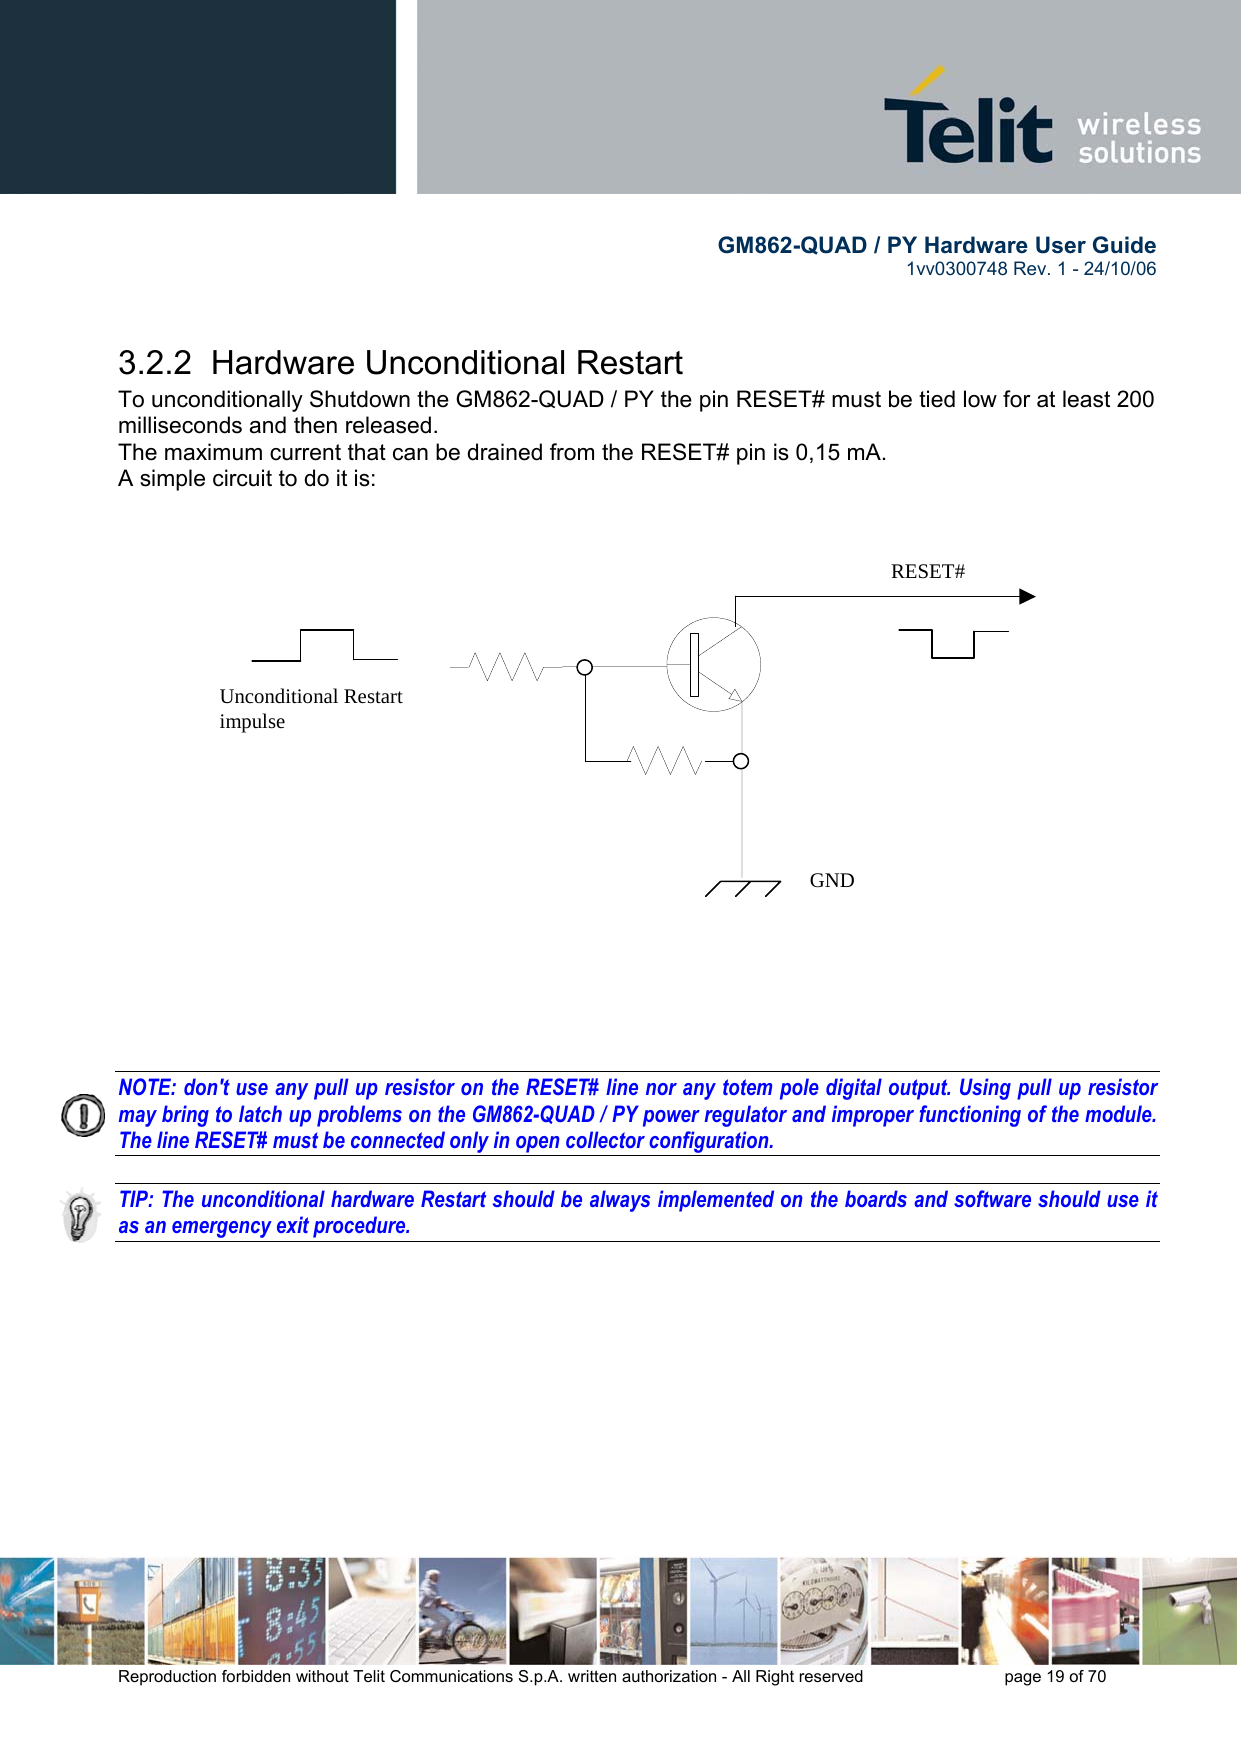        GM862-QUAD / PY Hardware User Guide   1vv0300748 Rev. 1 - 24/10/06    Reproduction forbidden without Telit Communications S.p.A. written authorization - All Right reserved    page 19 of 70   3.2.2  Hardware Unconditional Restart To unconditionally Shutdown the GM862-QUAD / PY the pin RESET# must be tied low for at least 200 milliseconds and then released. The maximum current that can be drained from the RESET# pin is 0,15 mA. A simple circuit to do it is:                       NOTE: don&apos;t use any pull up resistor on the RESET# line nor any totem pole digital output. Using pull up resistor may bring to latch up problems on the GM862-QUAD / PY power regulator and improper functioning of the module. The line RESET# must be connected only in open collector configuration.  TIP: The unconditional hardware Restart should be always implemented on the boards and software should use it as an emergency exit procedure.     RESET# Unconditional Restart impulse   GND